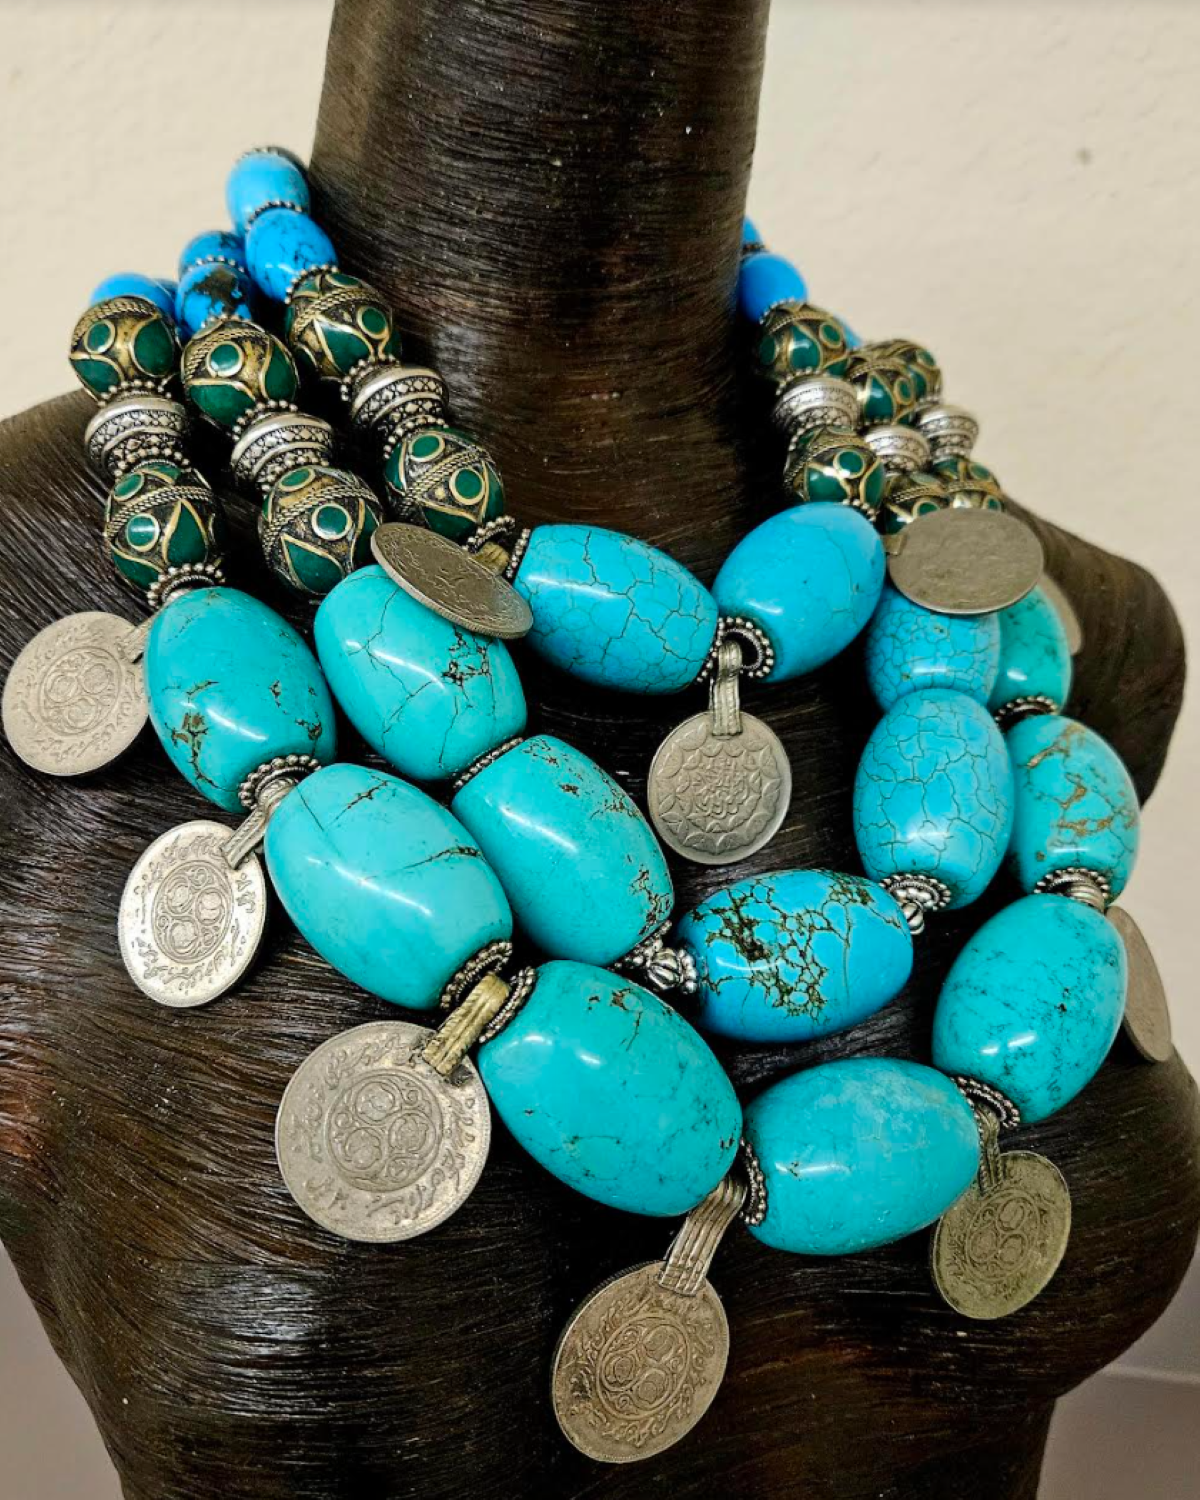 Bold Chunky & Heavy Tribal Beaded and Coin Statement Necklace, Belly Dancer Jewelry, Exotic Wild Ethnic Inspired Neck Candy